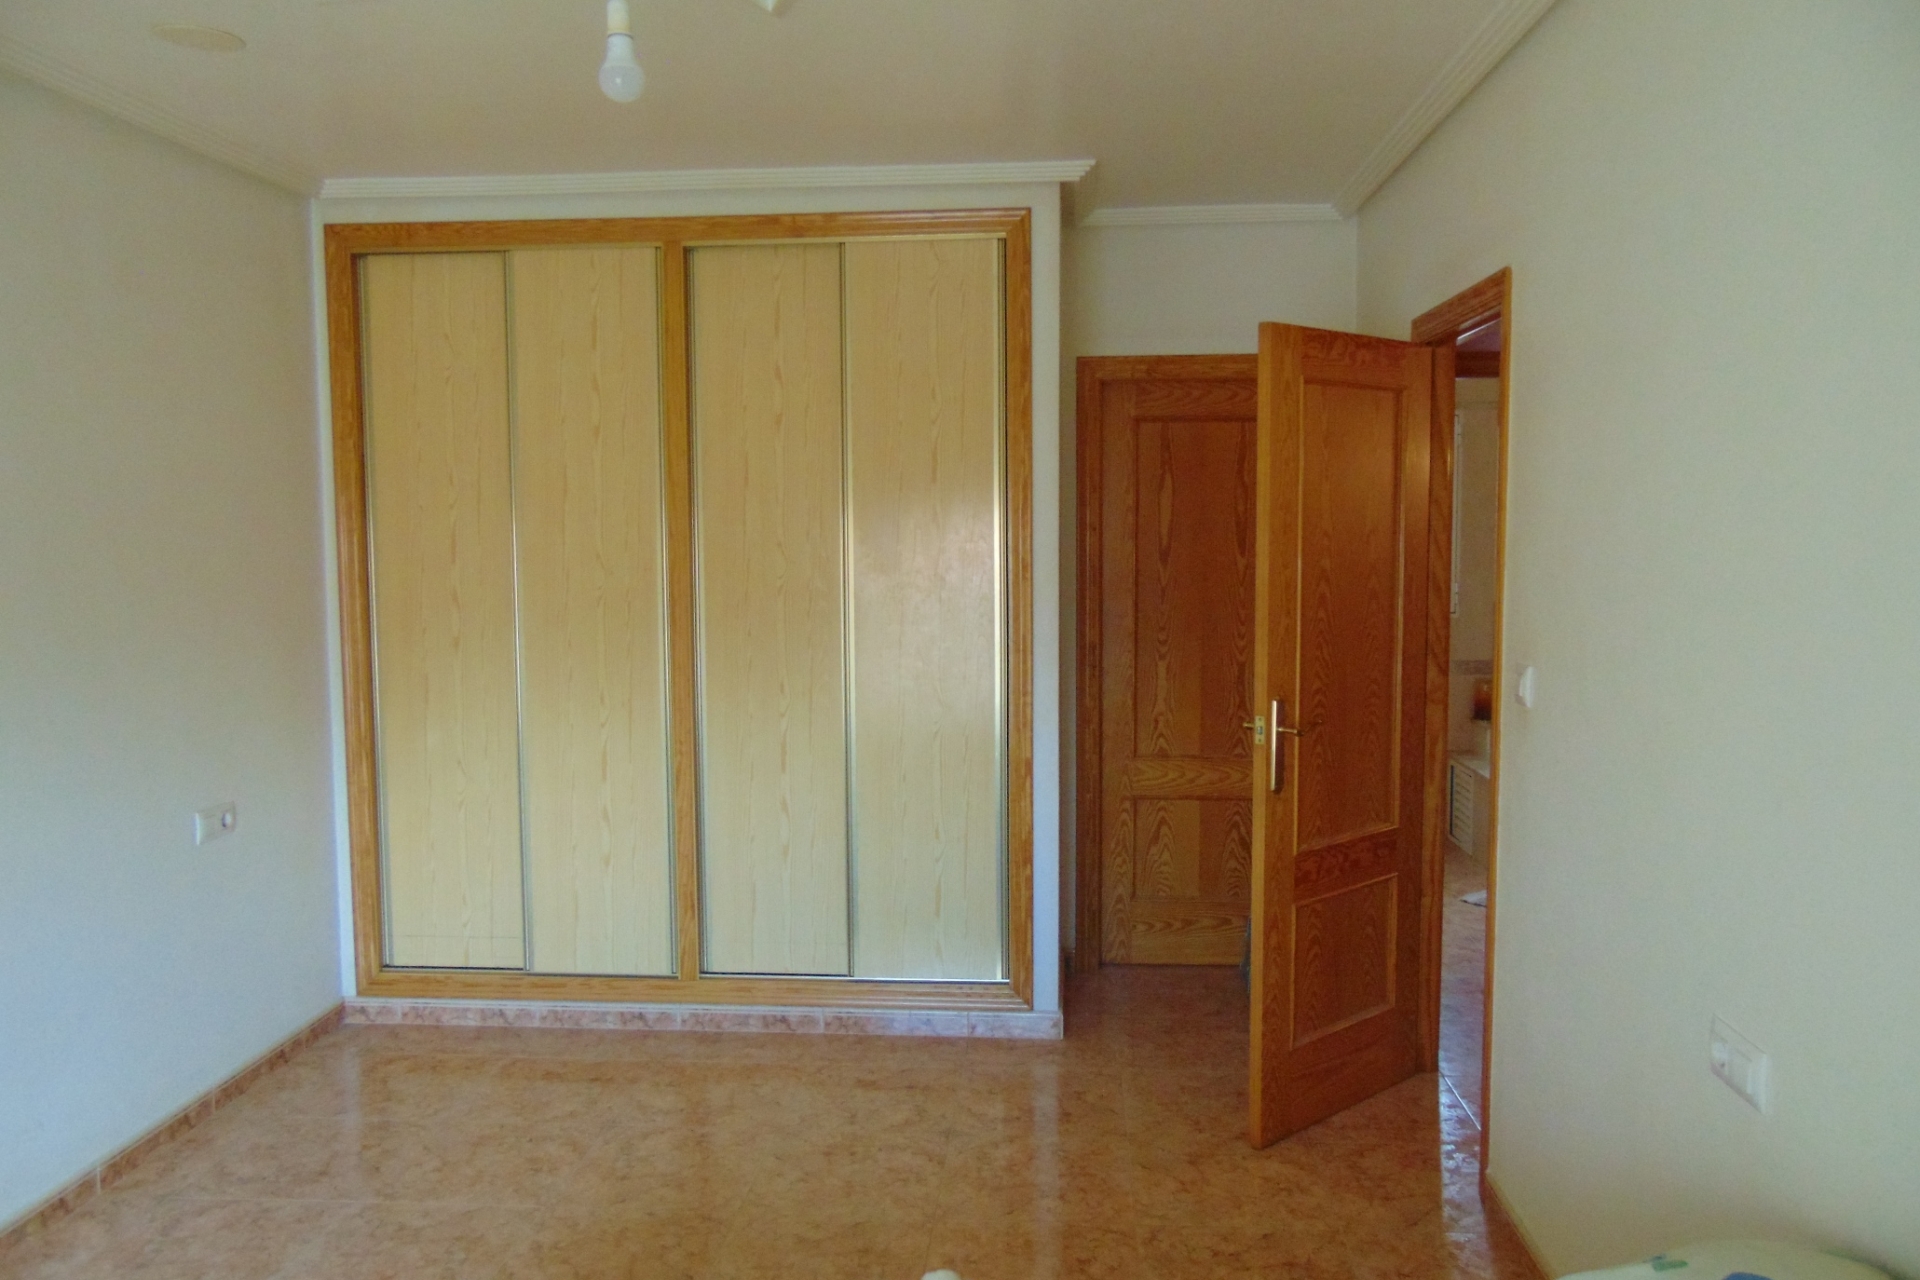 Property for sale - Townhouse for sale - Torre Pacheco - Torre Pacheco Town